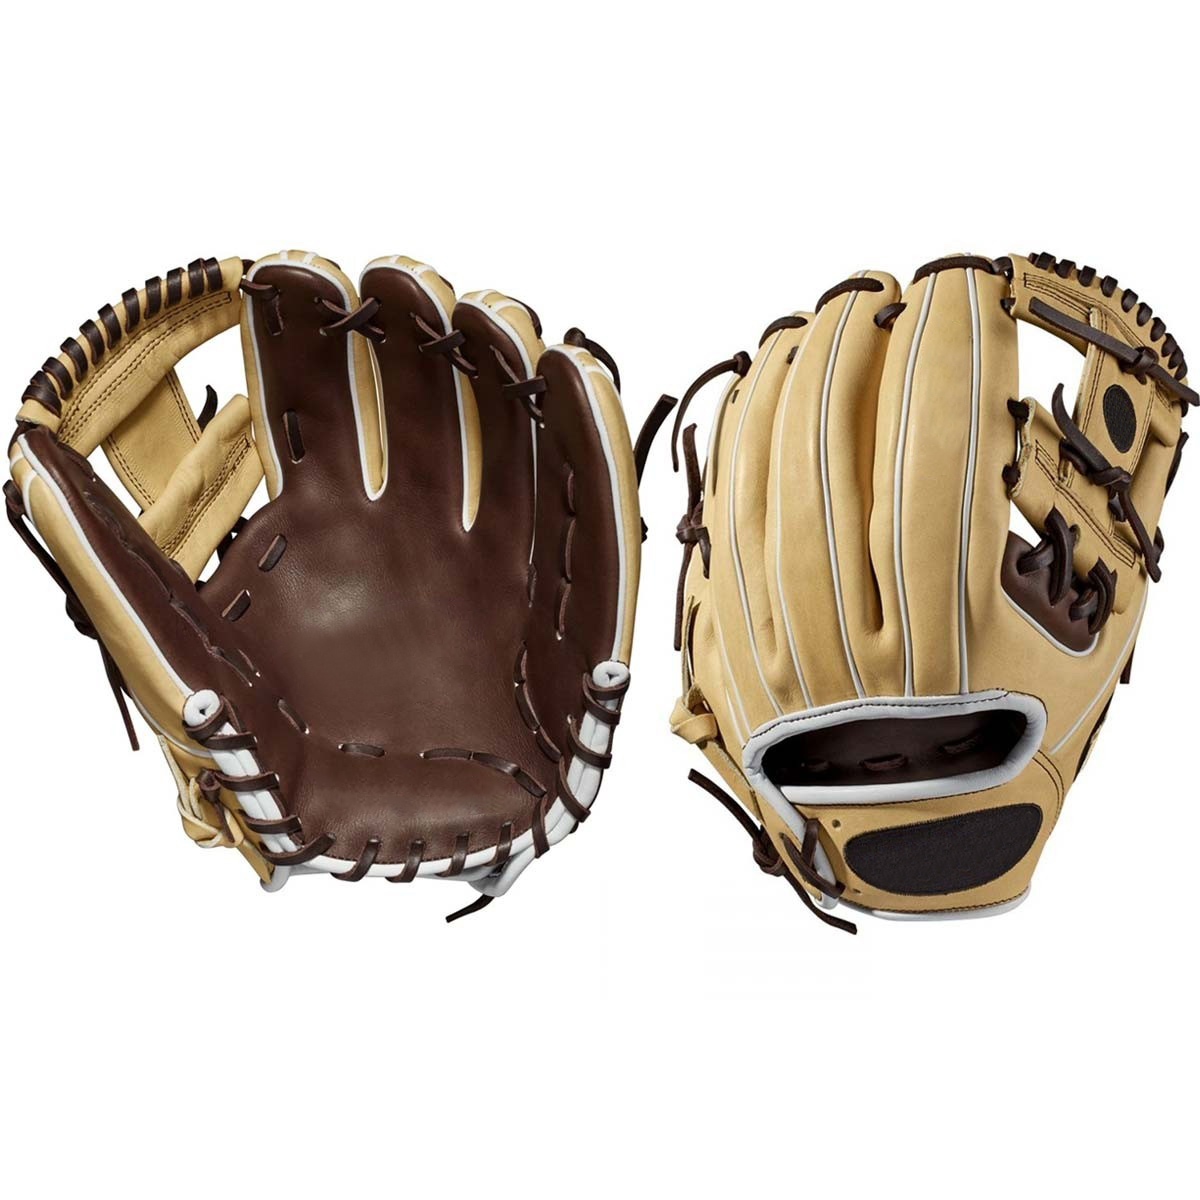 11.5" Full leather brown and camel infield baseball gloves